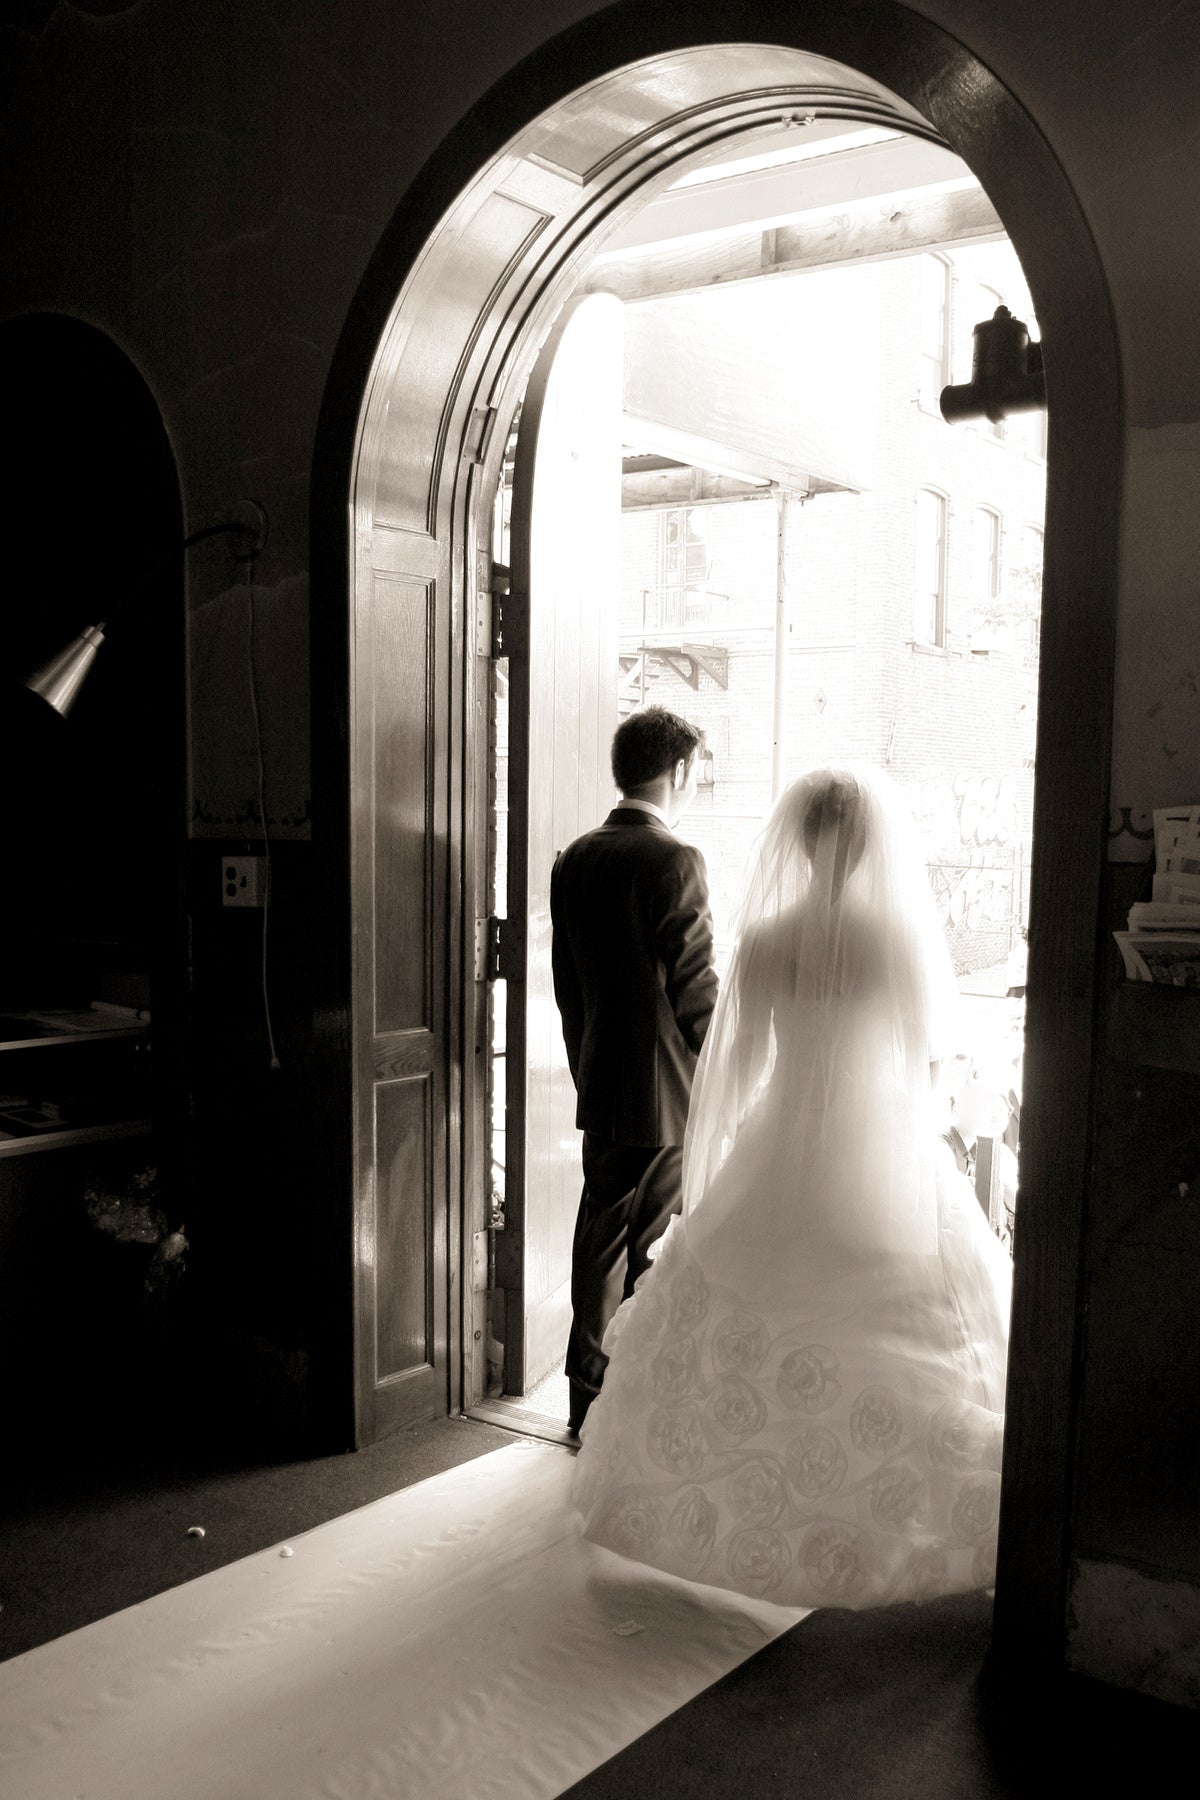 Example of using compositional framing in wedding photography